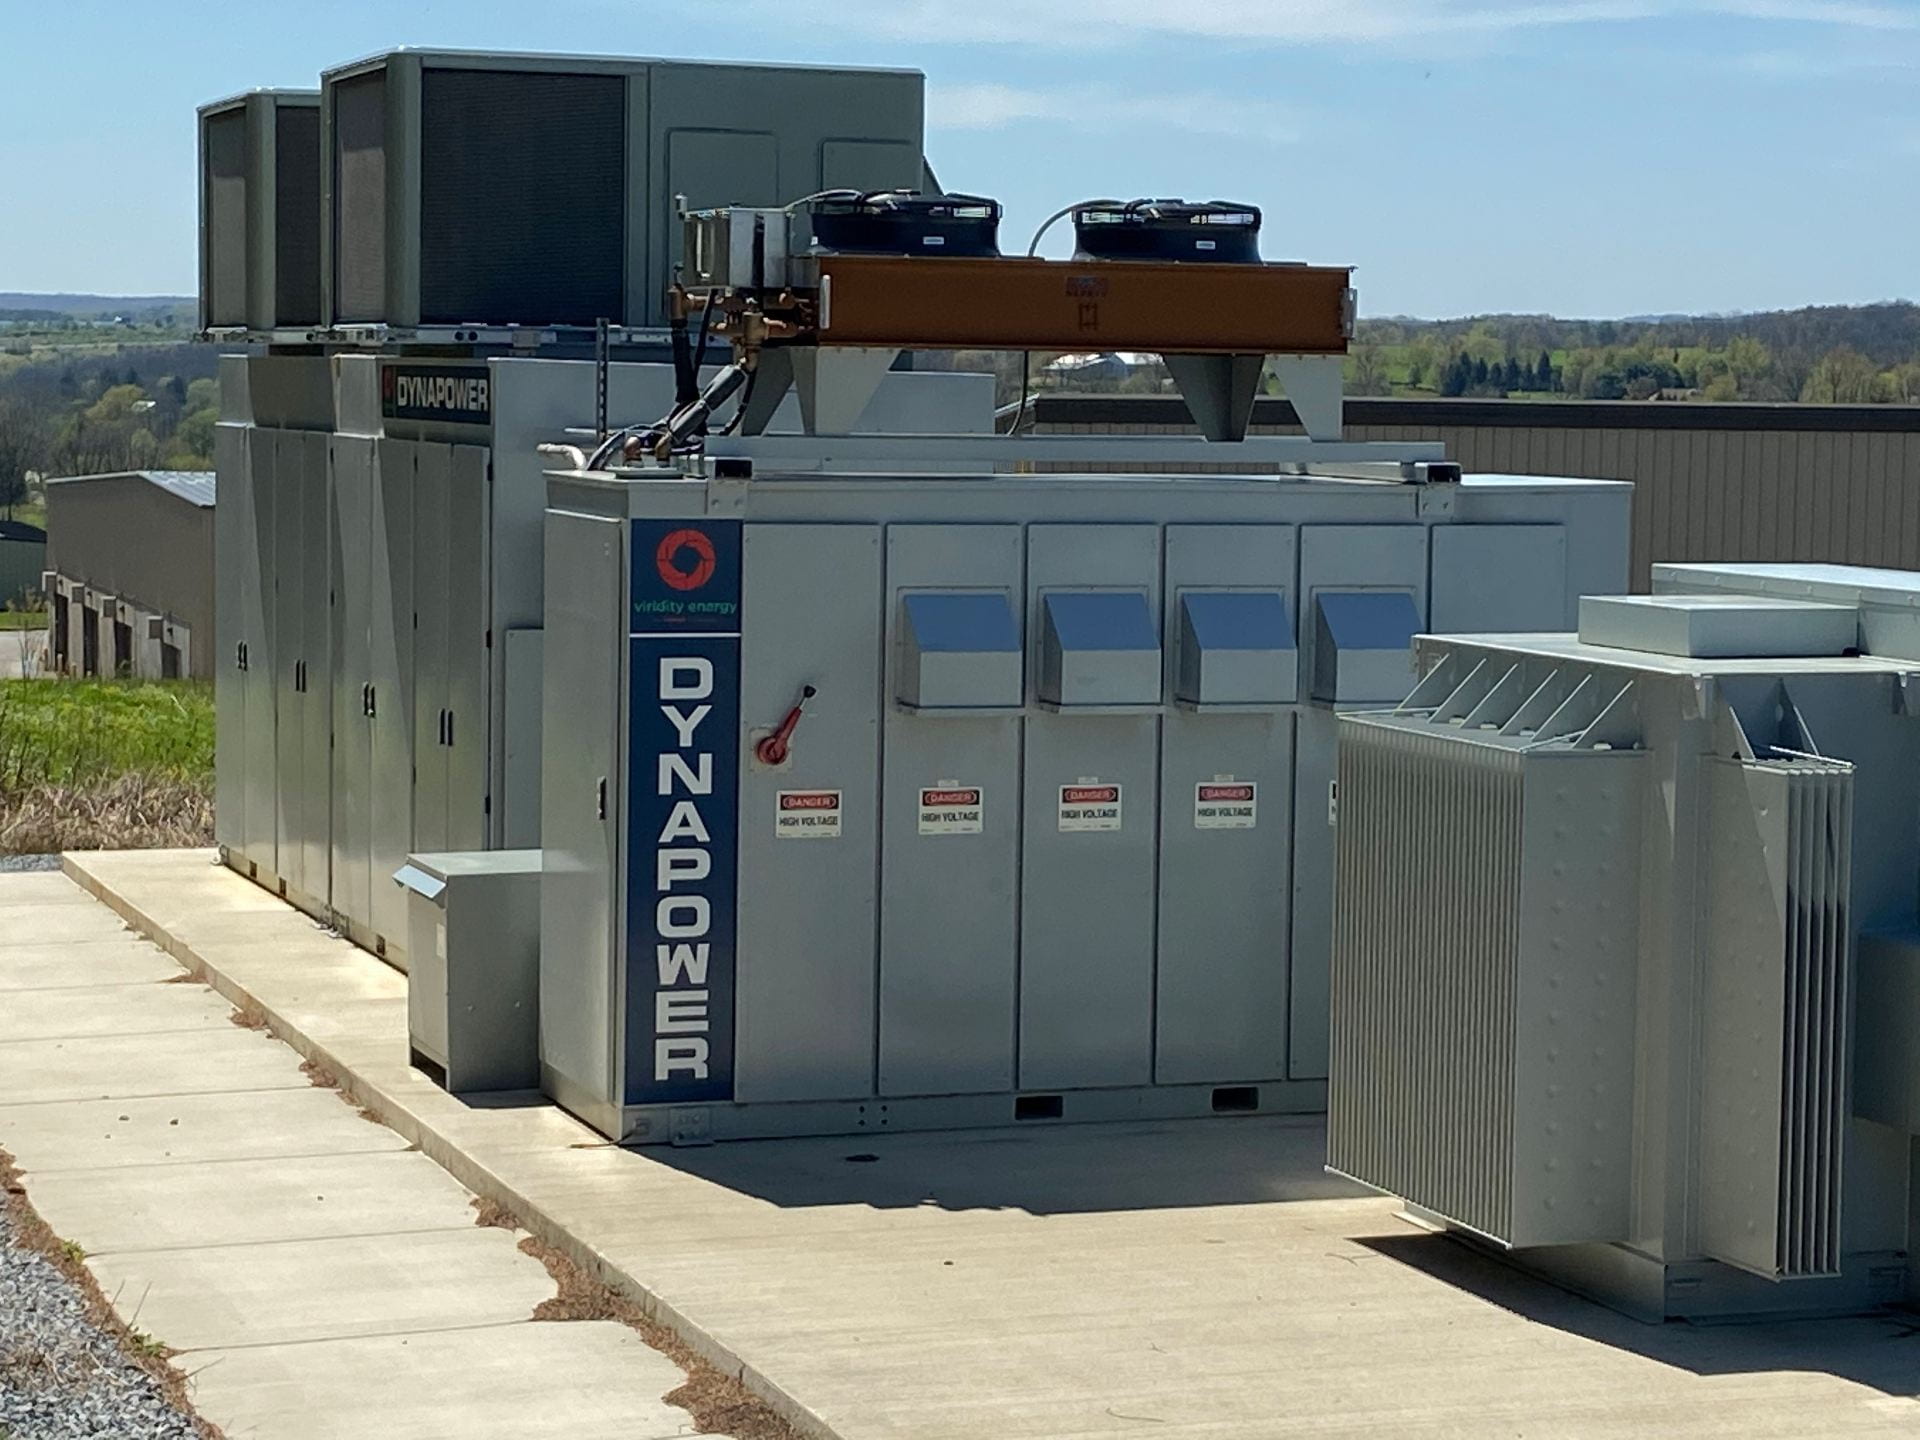 Battery storage (Dynapower) at a GSSD site. Note cooling fans on top of battery unit. Transformer in front. Credit: Penn State MCOR